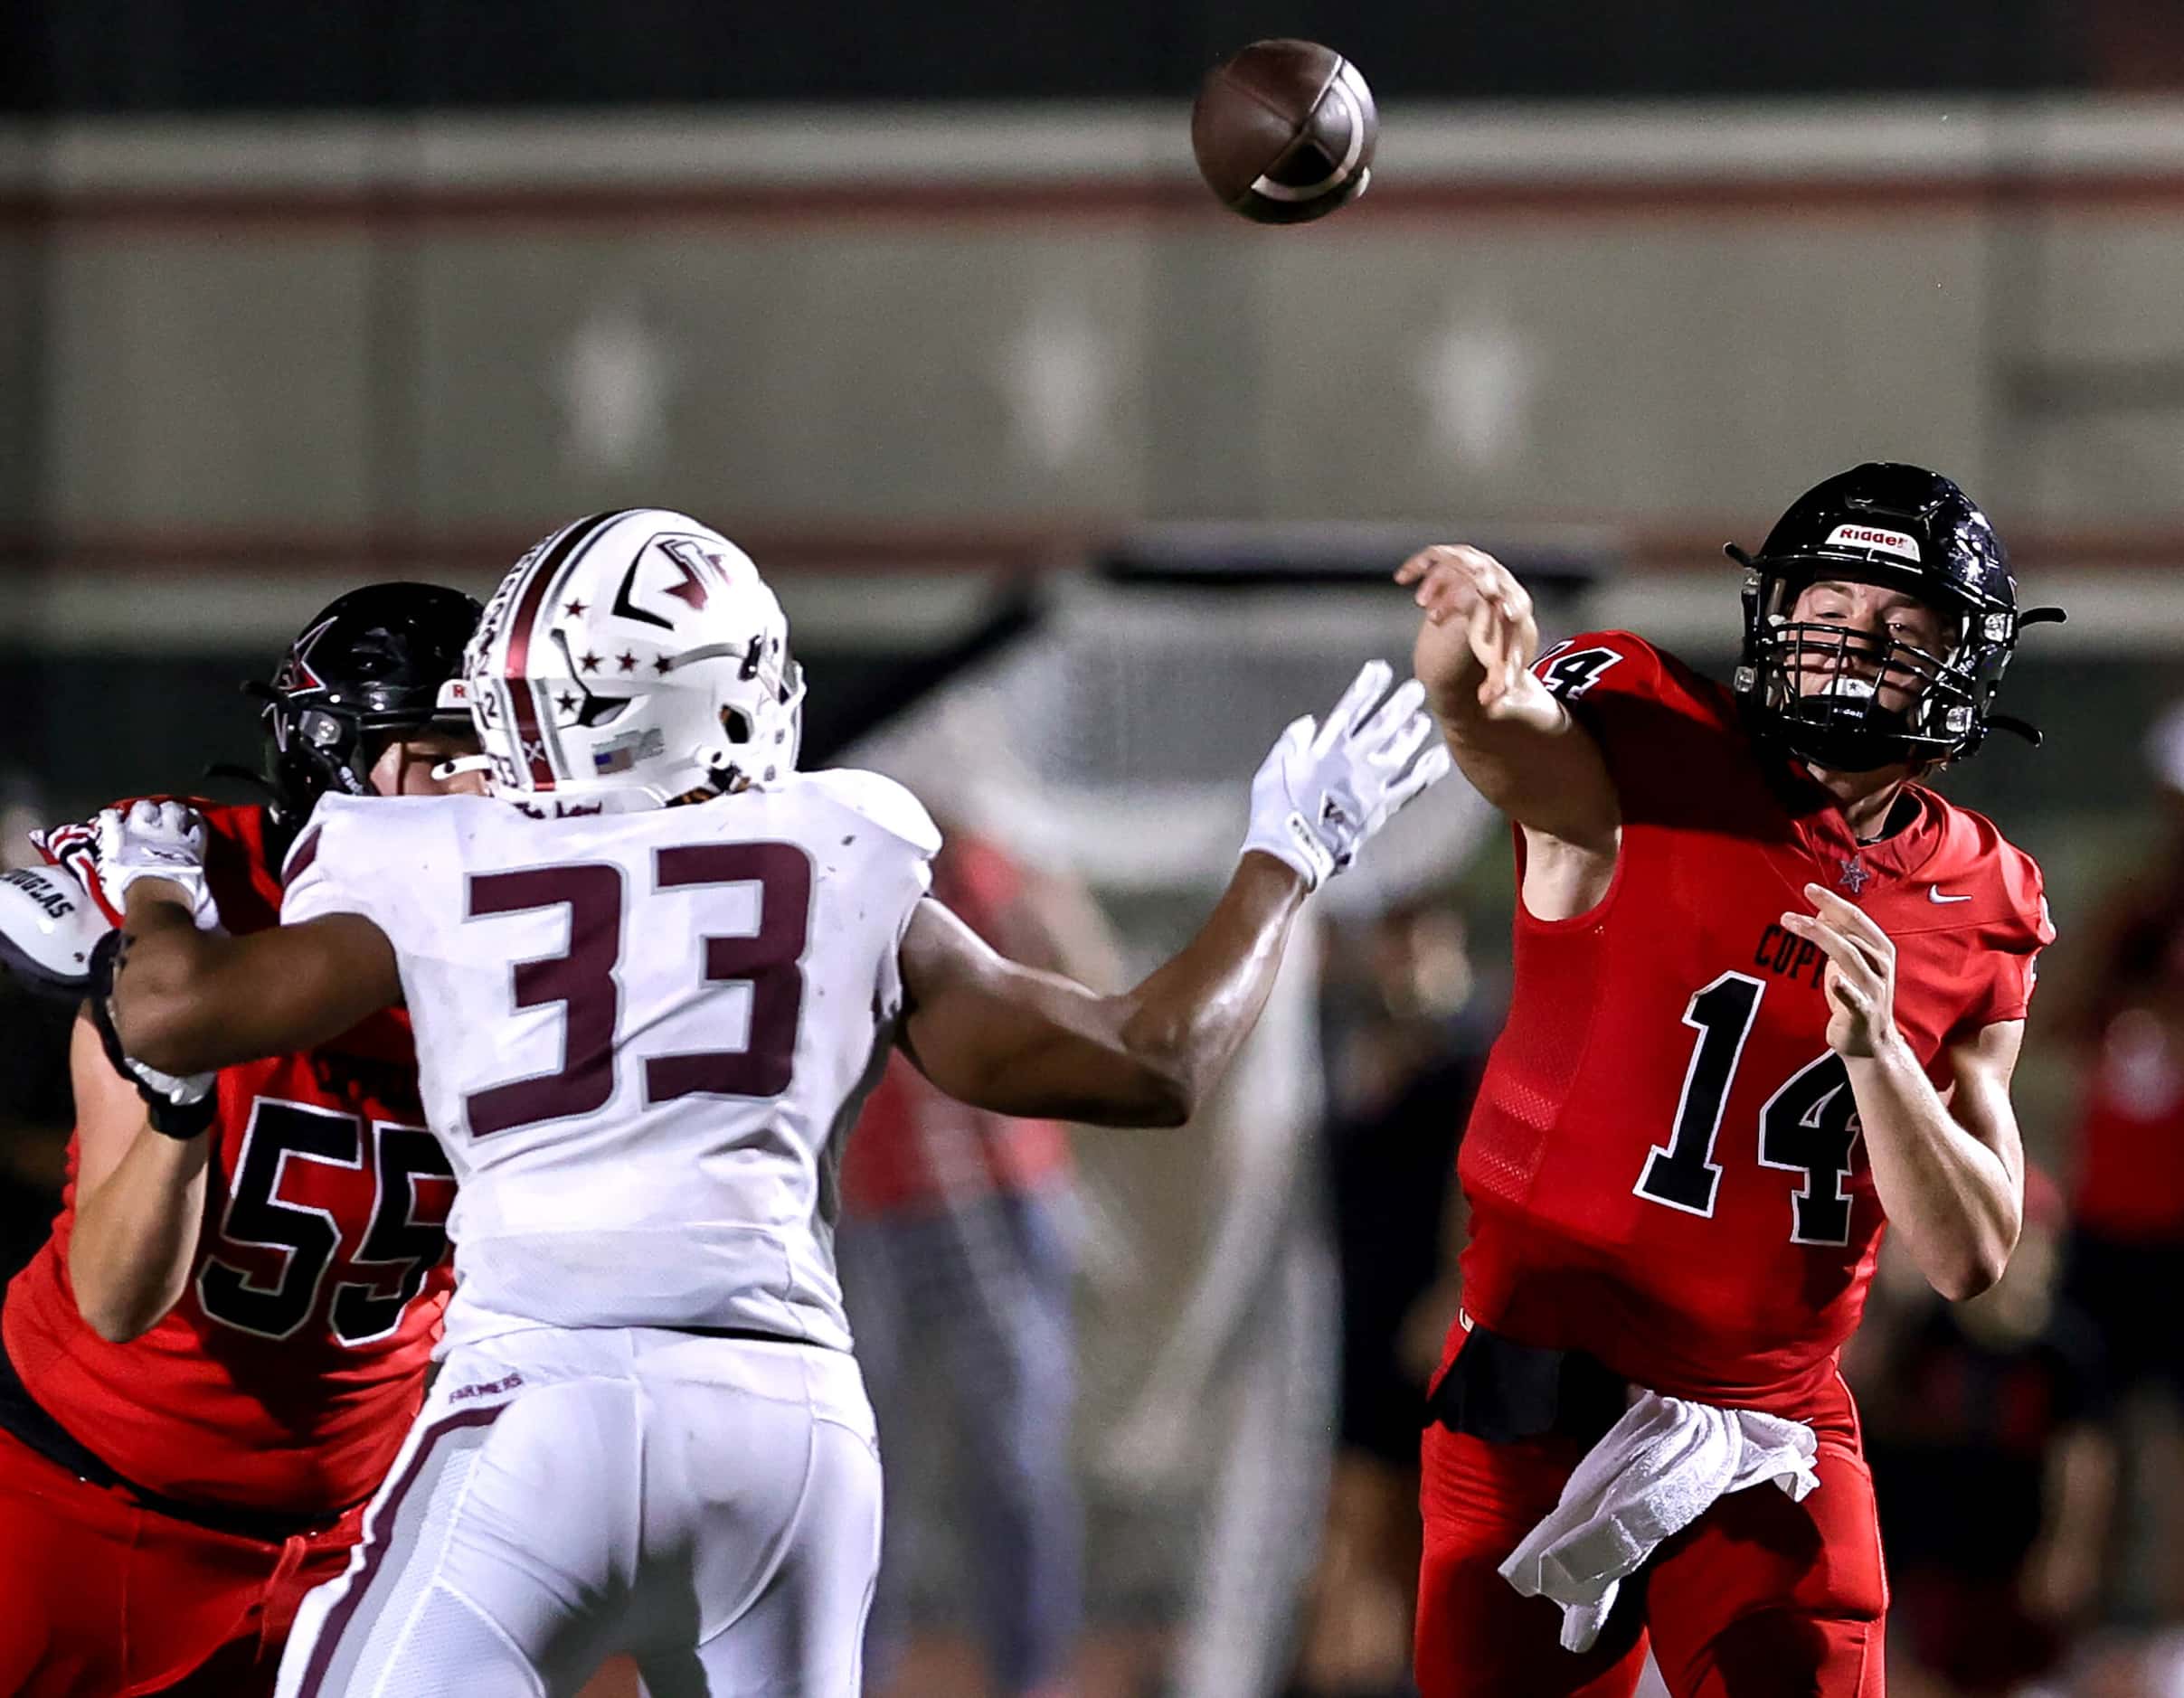 Coppell quarterback Edward Griffin (14) gets the pass off over Lewisville defensive lineman...